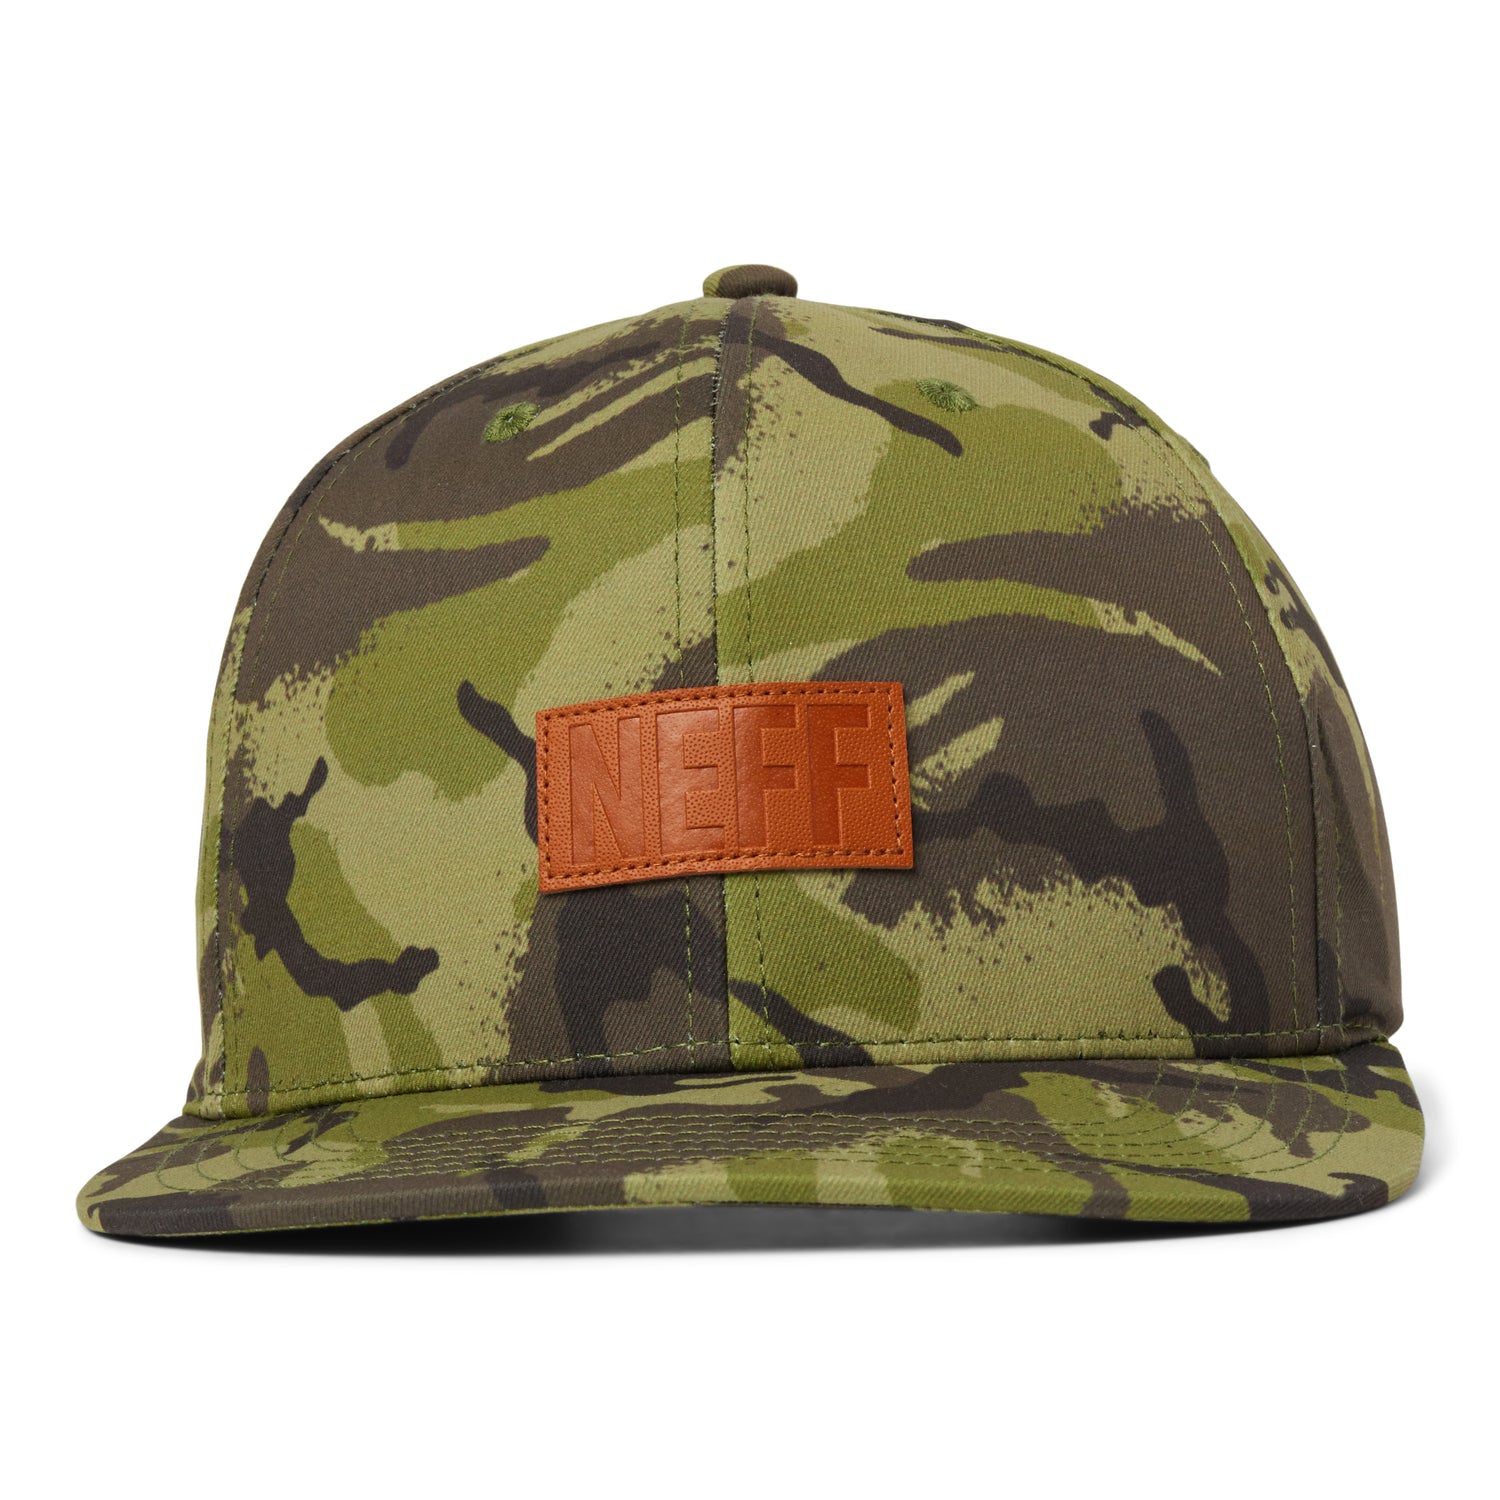 CORP LEATHER PATCH GREEN HAT - CAMO